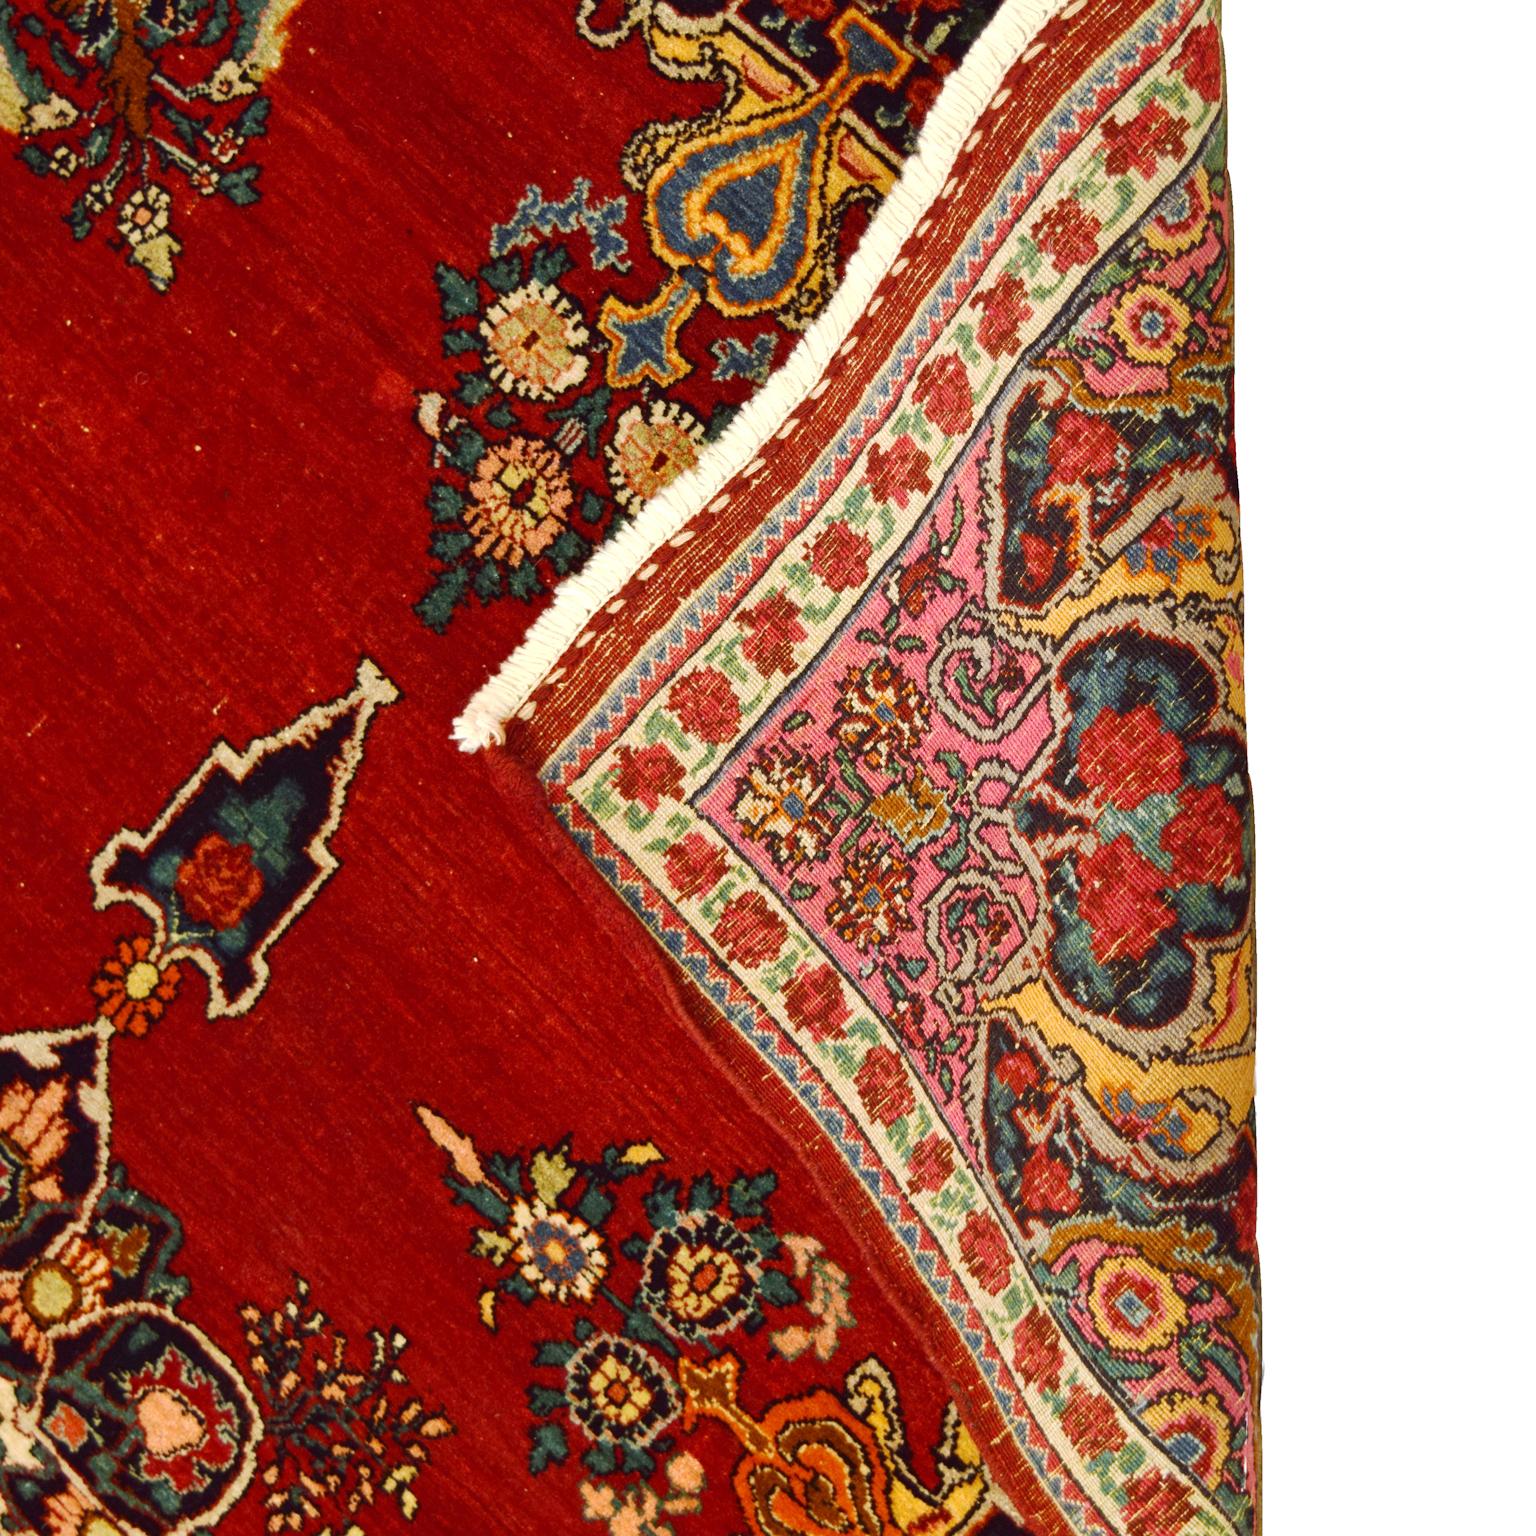 20th Century Antique Formal 1900s Persian Bidjar Rug in Red, Blue, and Gold, 4' x 6' For Sale